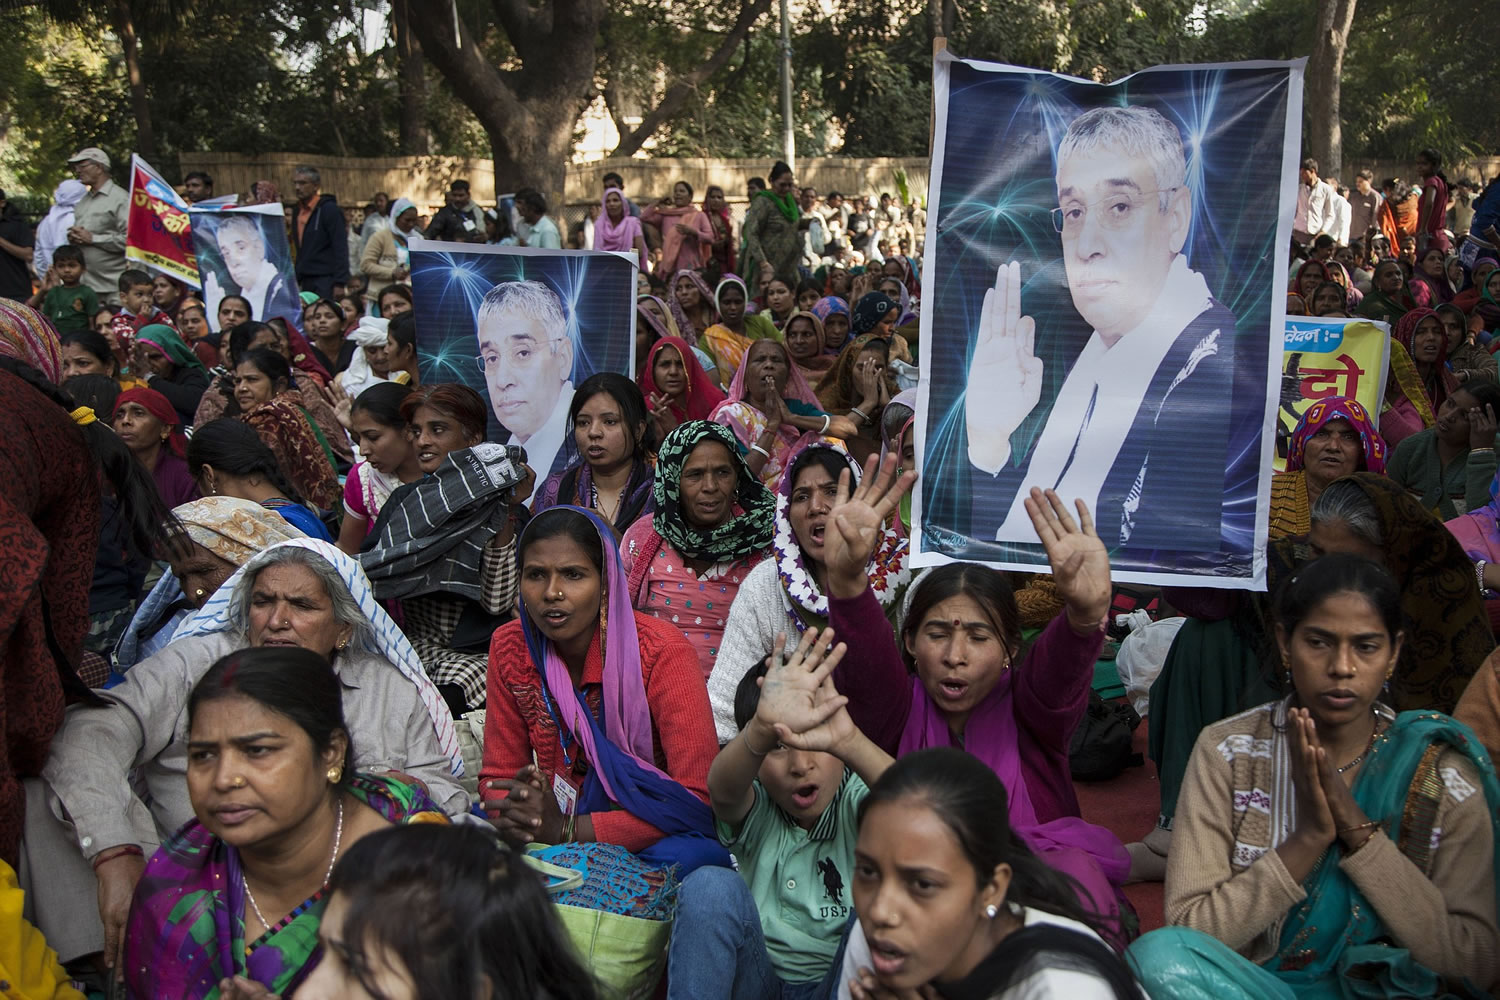 Supporters of controversial Indian guru Sant Rampal displaying his photographs, chant slogans praising him as they gather to show support at a protest venue near the Indian Parliament in New Delhi, India, on Tuesday.